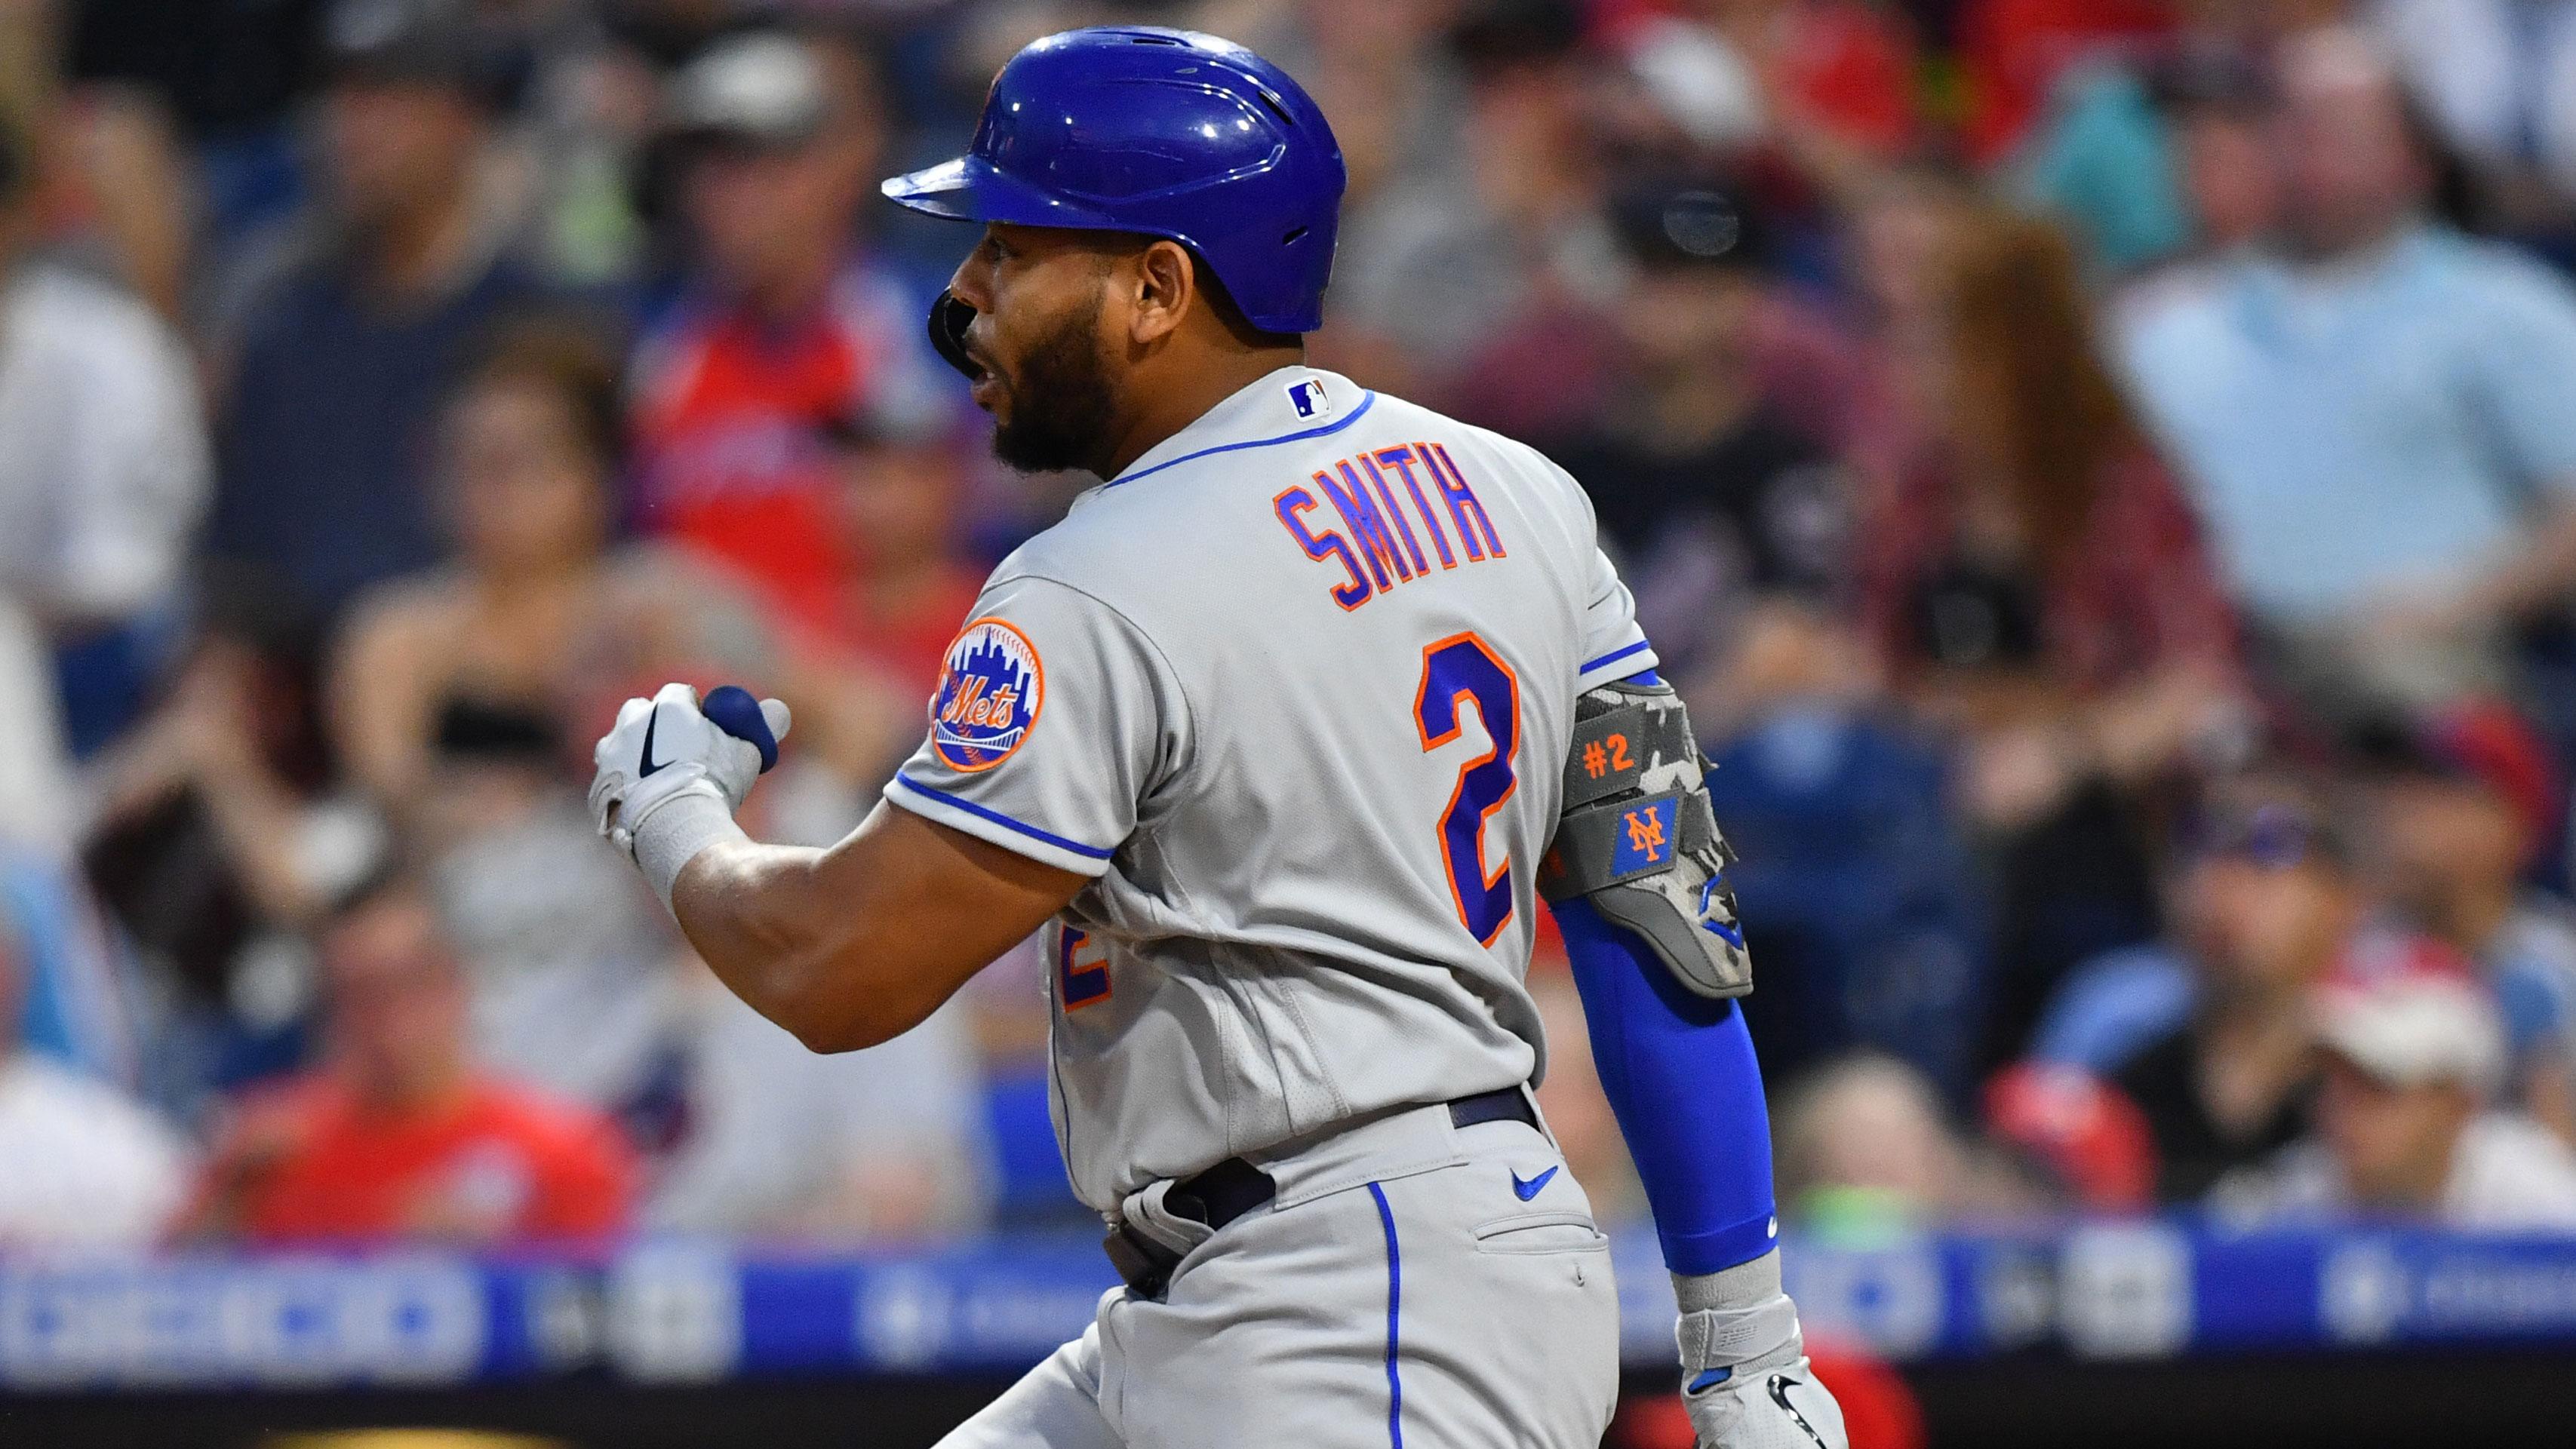 Aug 6, 2021; Philadelphia, Pennsylvania, USA; New York Mets left fielder Dominic Smith (2) hits an RBI single in the third inning against the Philadelphia Phillies at Citizens Bank Park. / Kyle Ross-USA TODAY Sports